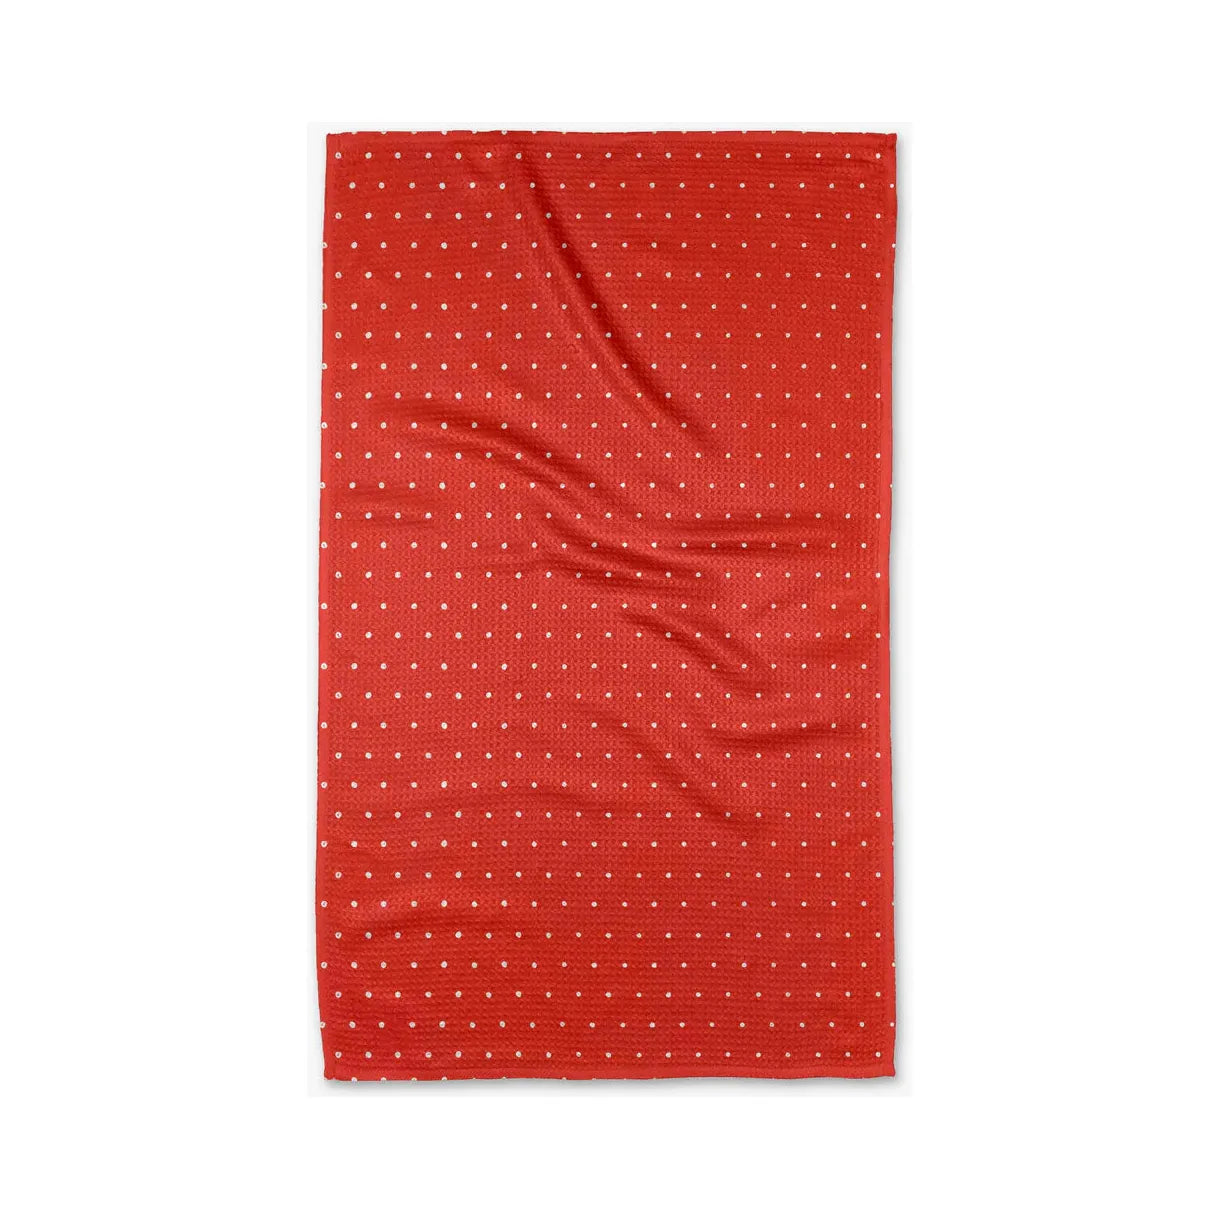 Copy of Merry Berry Cherry Red Geometry Tea Towel Kitchen Towels Browns Kitchen